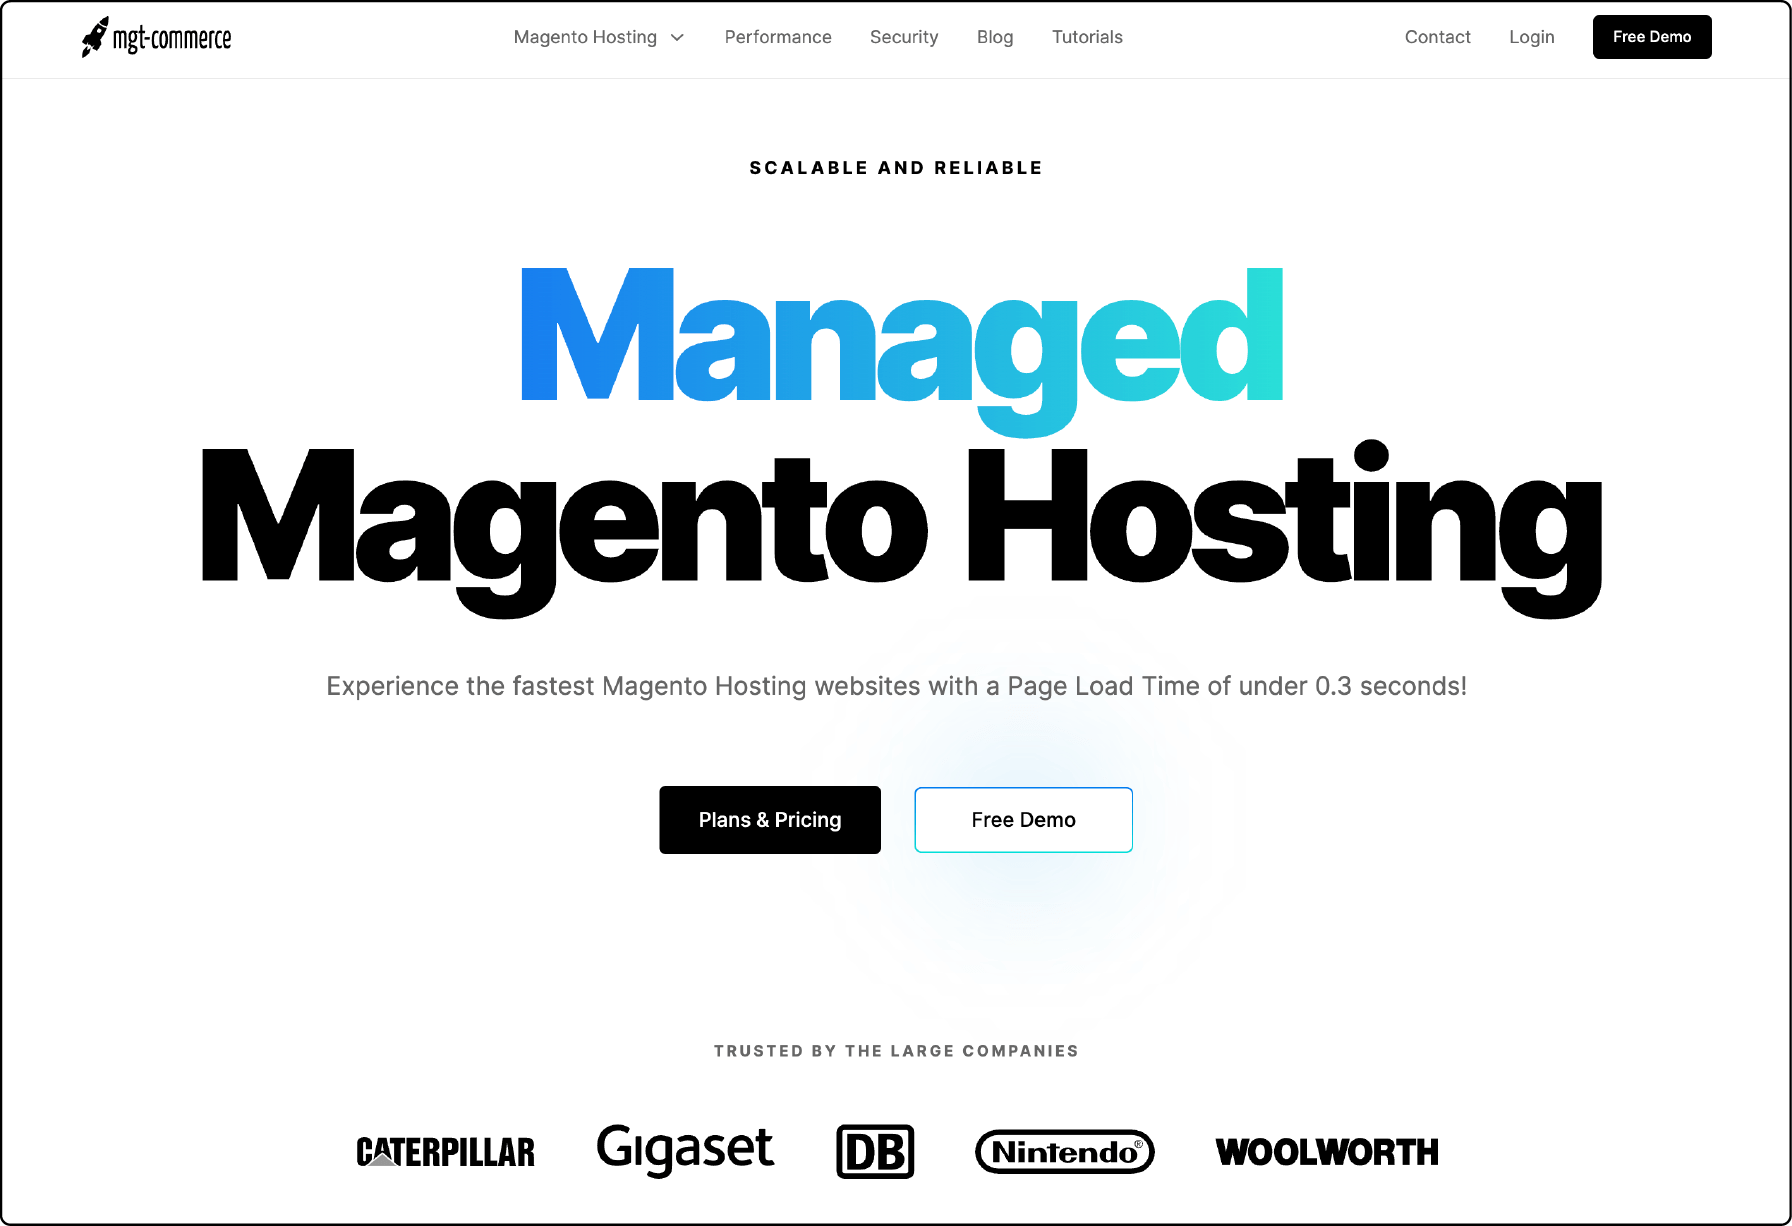 MGT-Commerce fast Magento hosting